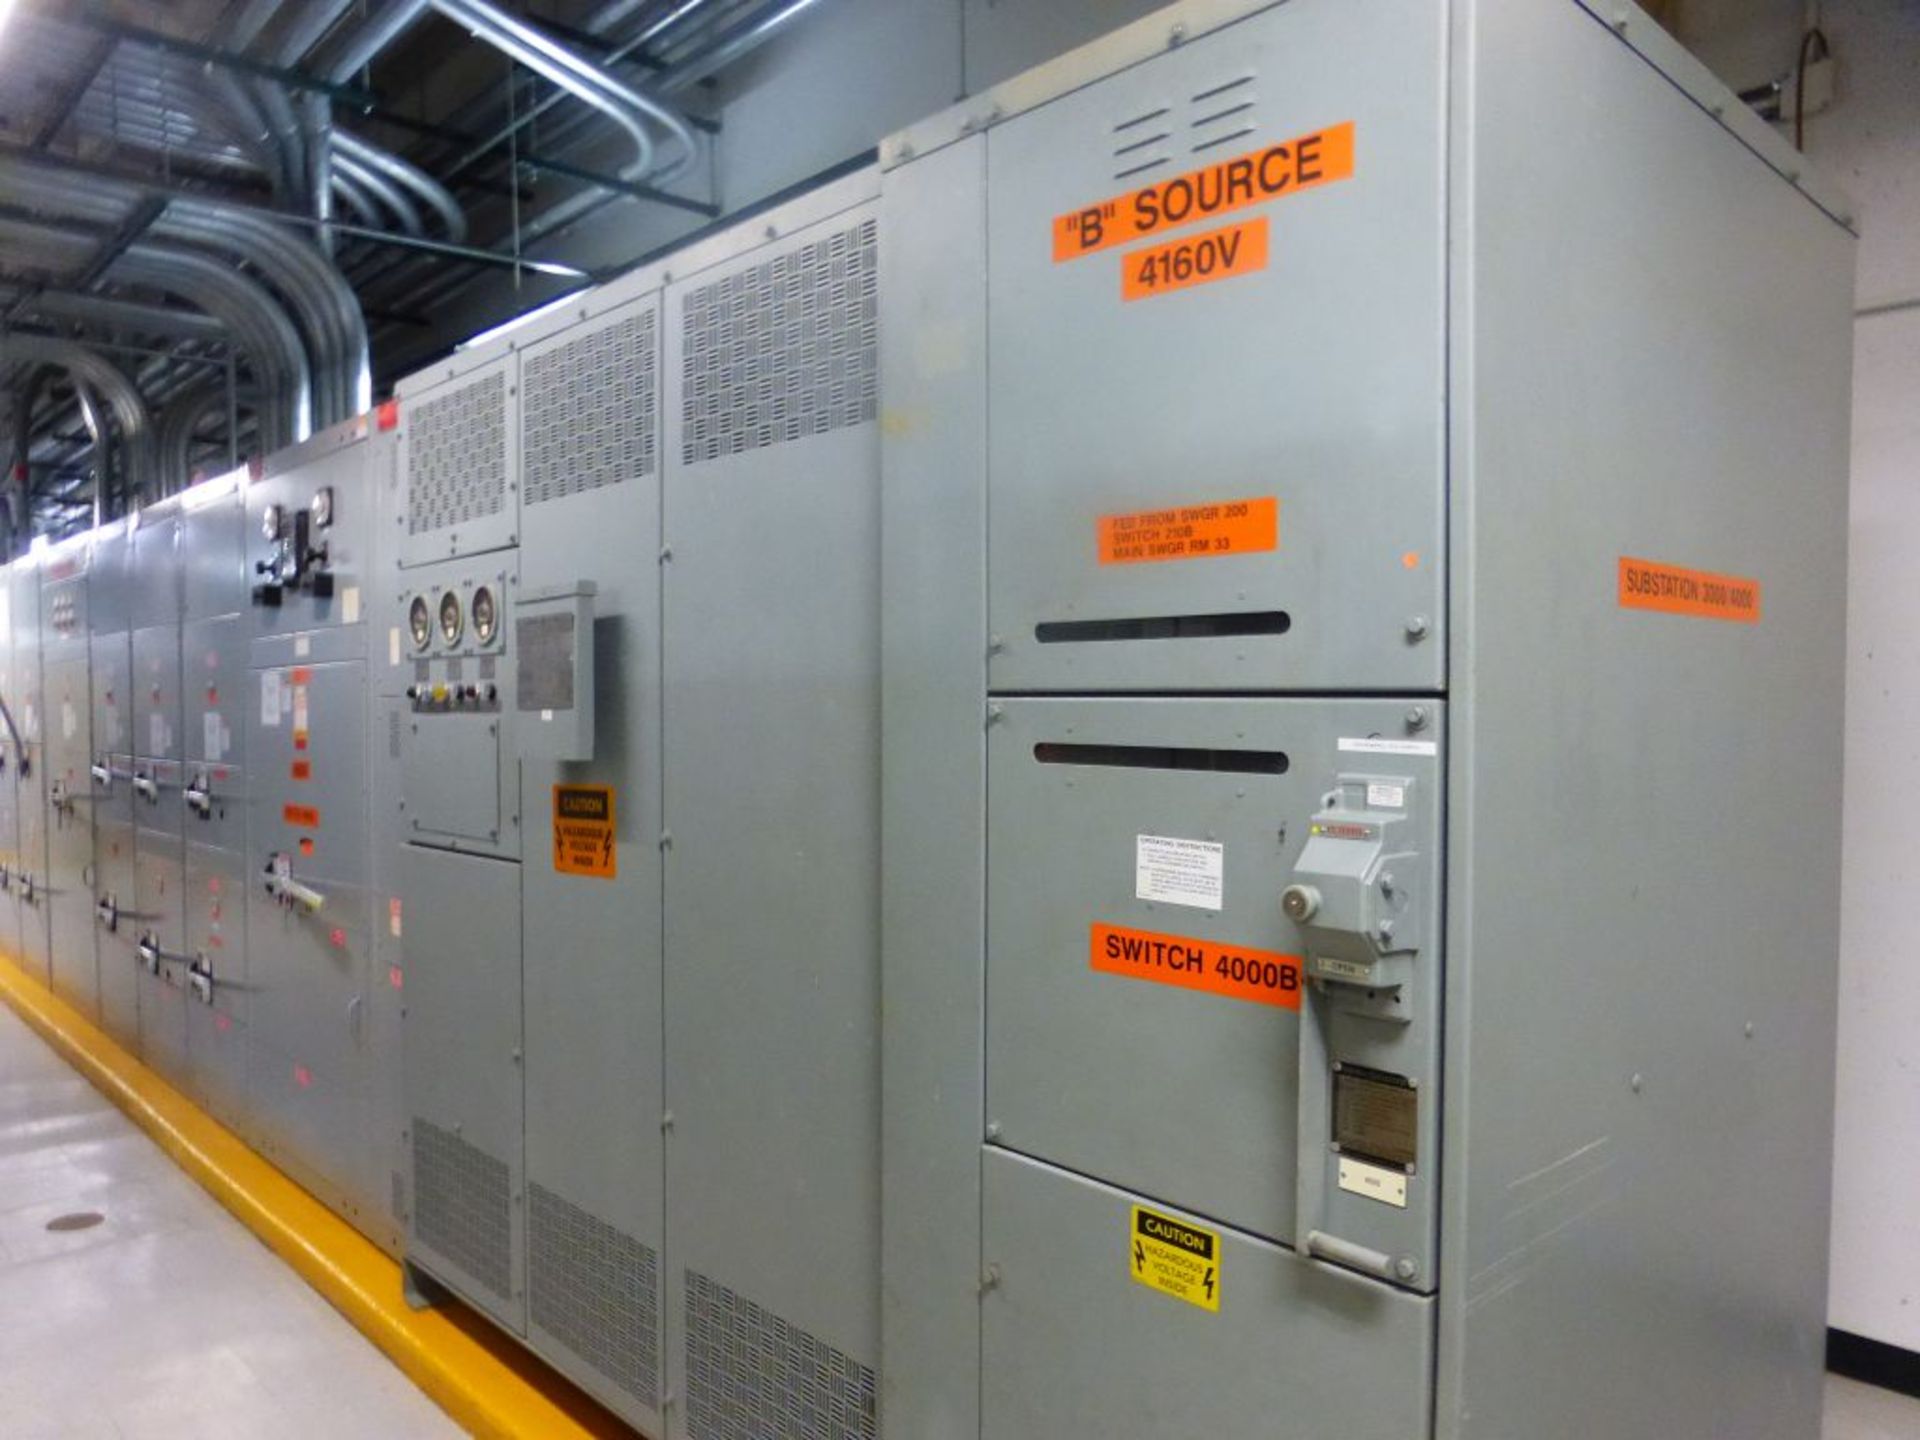 GE Transformer w/Interrupter Switch | 2000/2667 KVA; 4160 Primary Voltage; 480Y/277 Secondary - Image 2 of 19